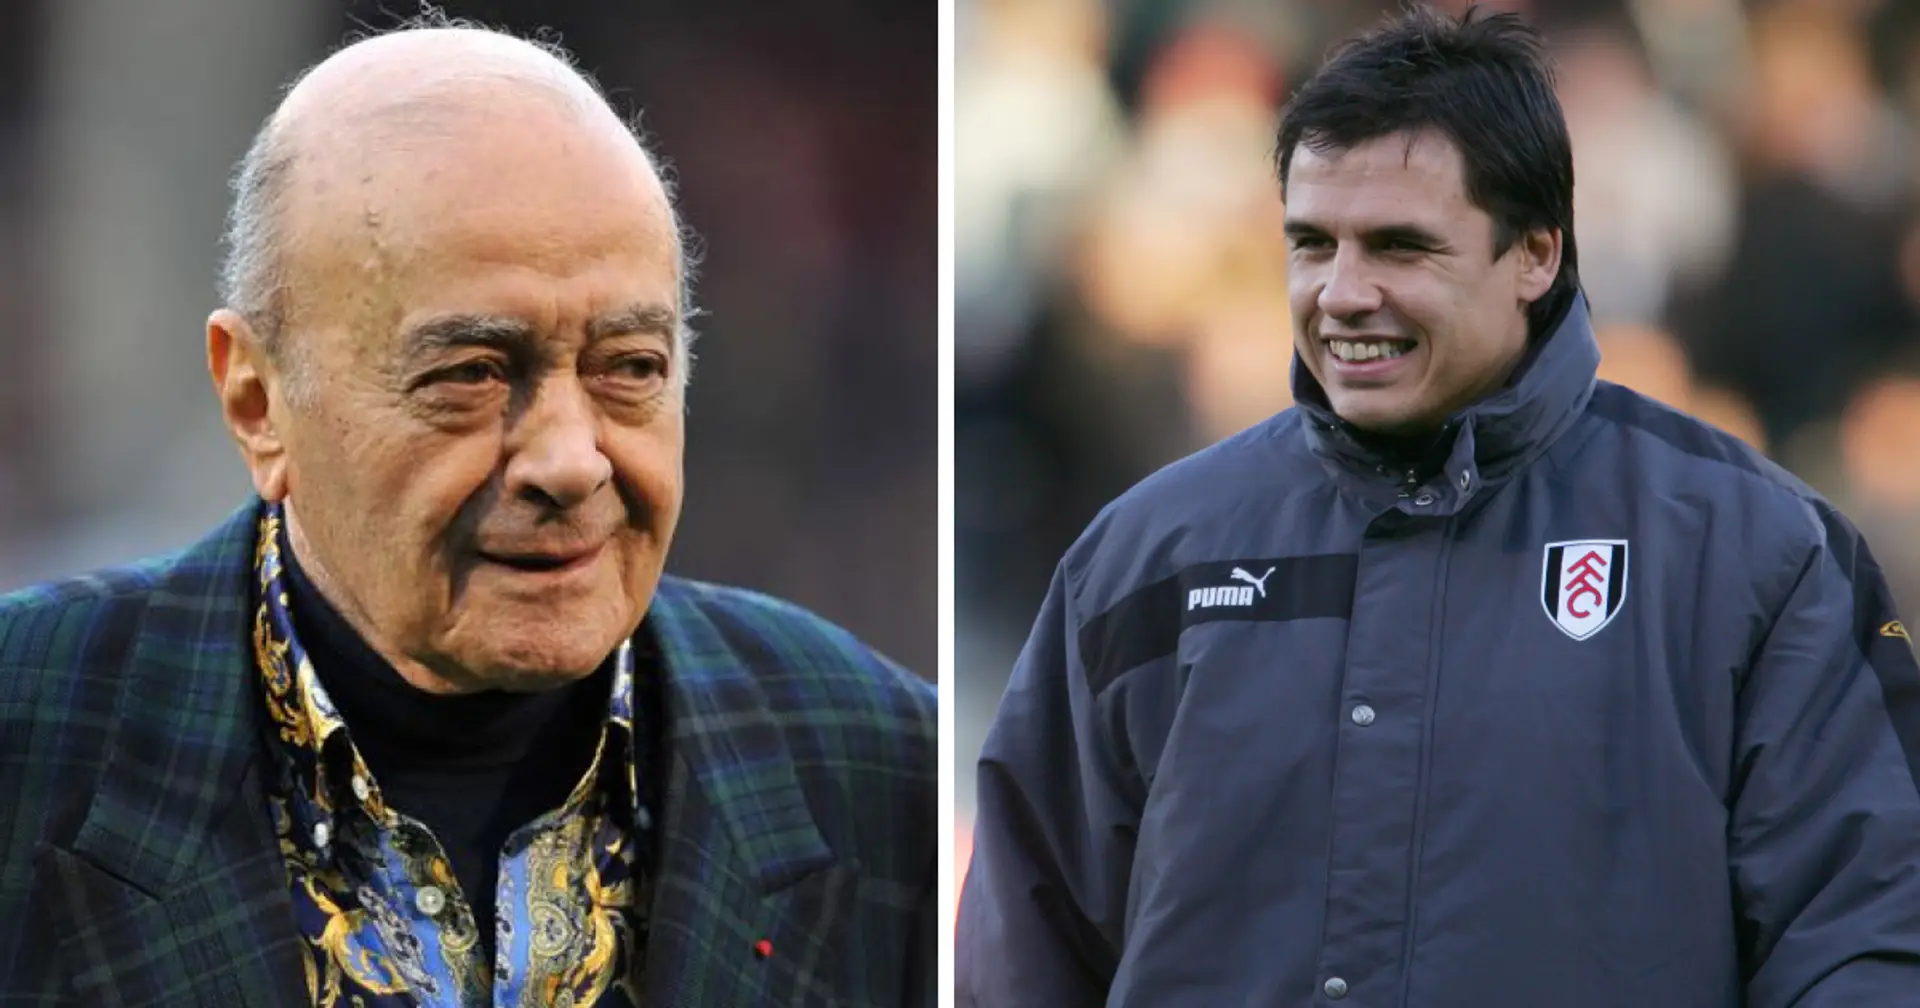 'He handed out Viagra tablets to the players': former Fulham manager on ex-Fulham owner Mohamed Al-Fayed 